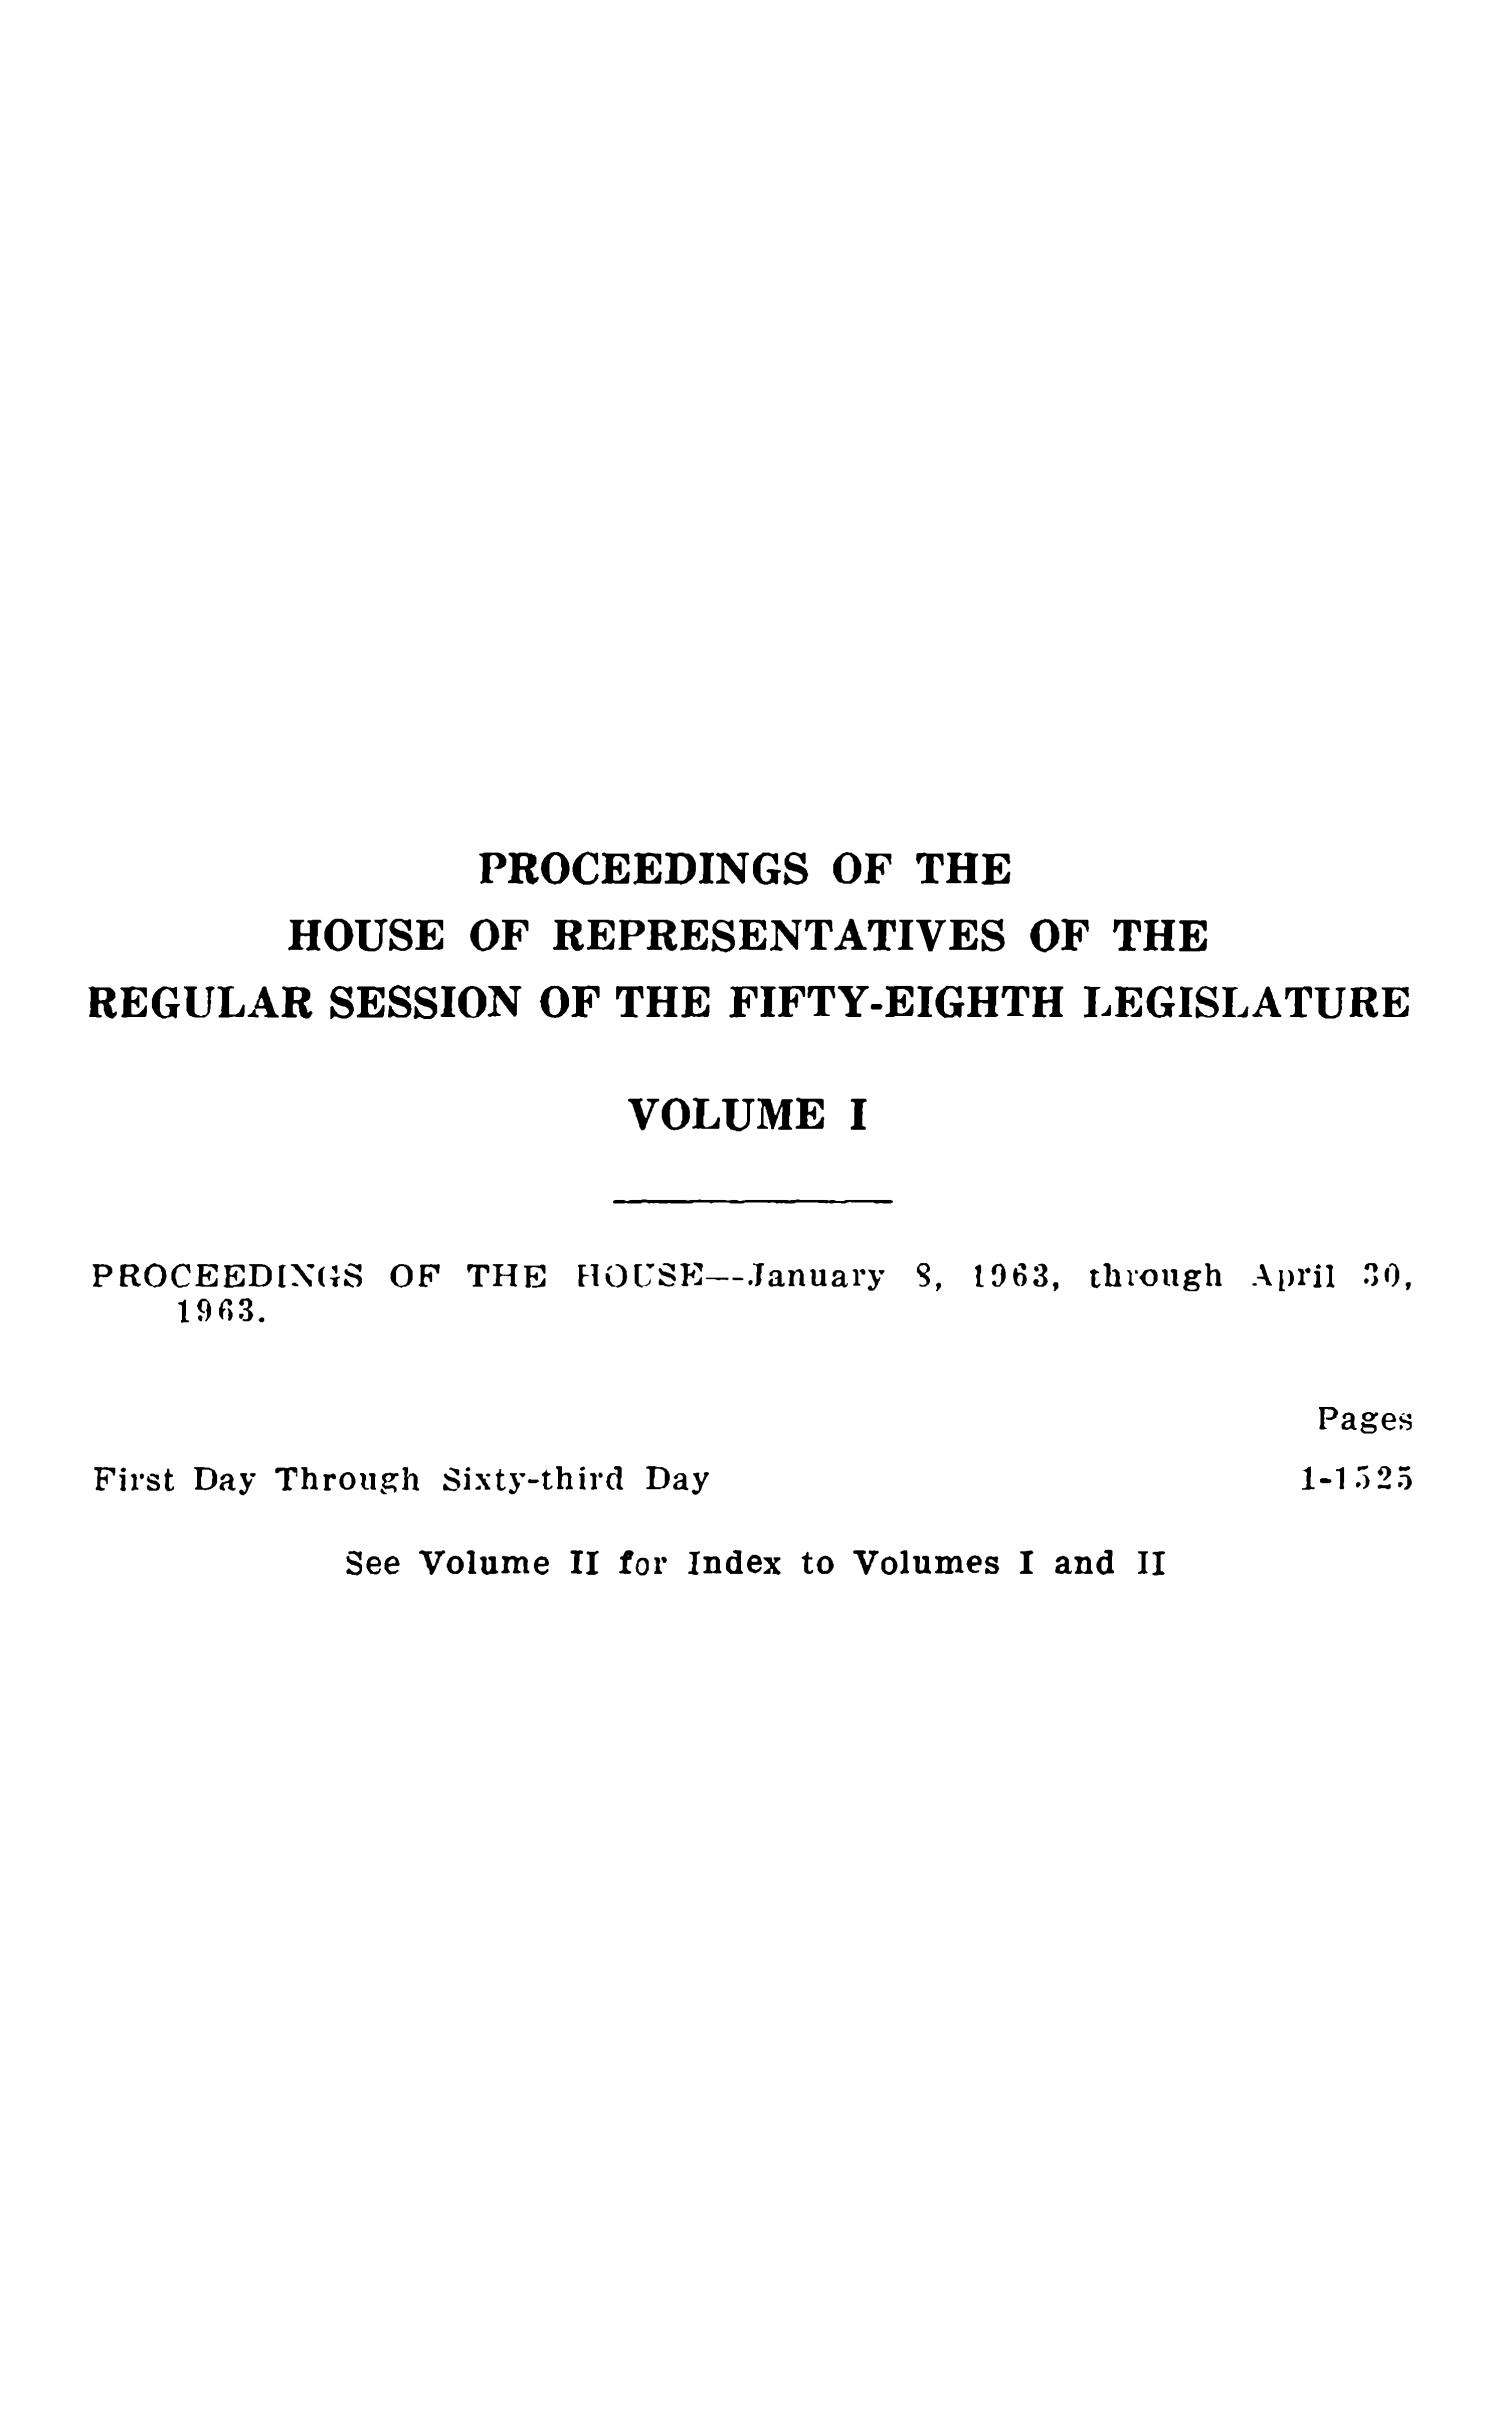 Journal of the House of Representatives of the Regular Session of the Fifty-Eighth Legislature of the State of Texas, Volume 1
                                                
                                                    None
                                                